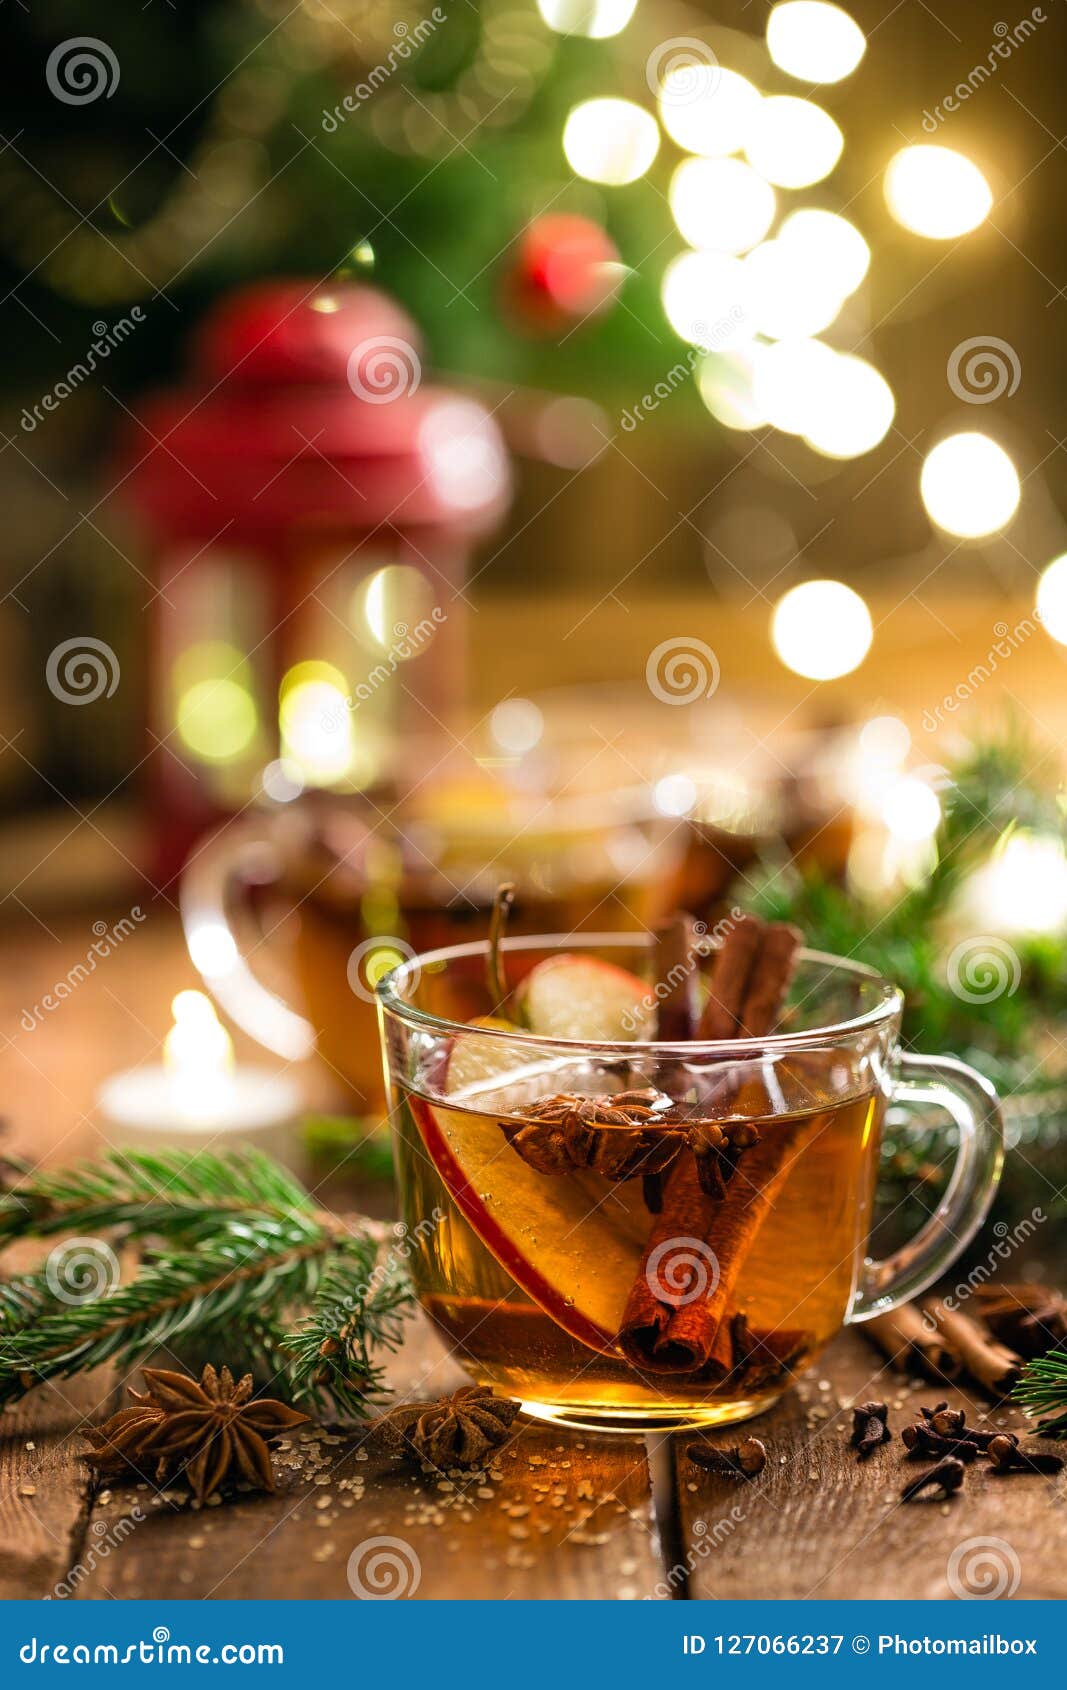 mulled cider with cinnamon, cloves and anise. traditional christmas drink